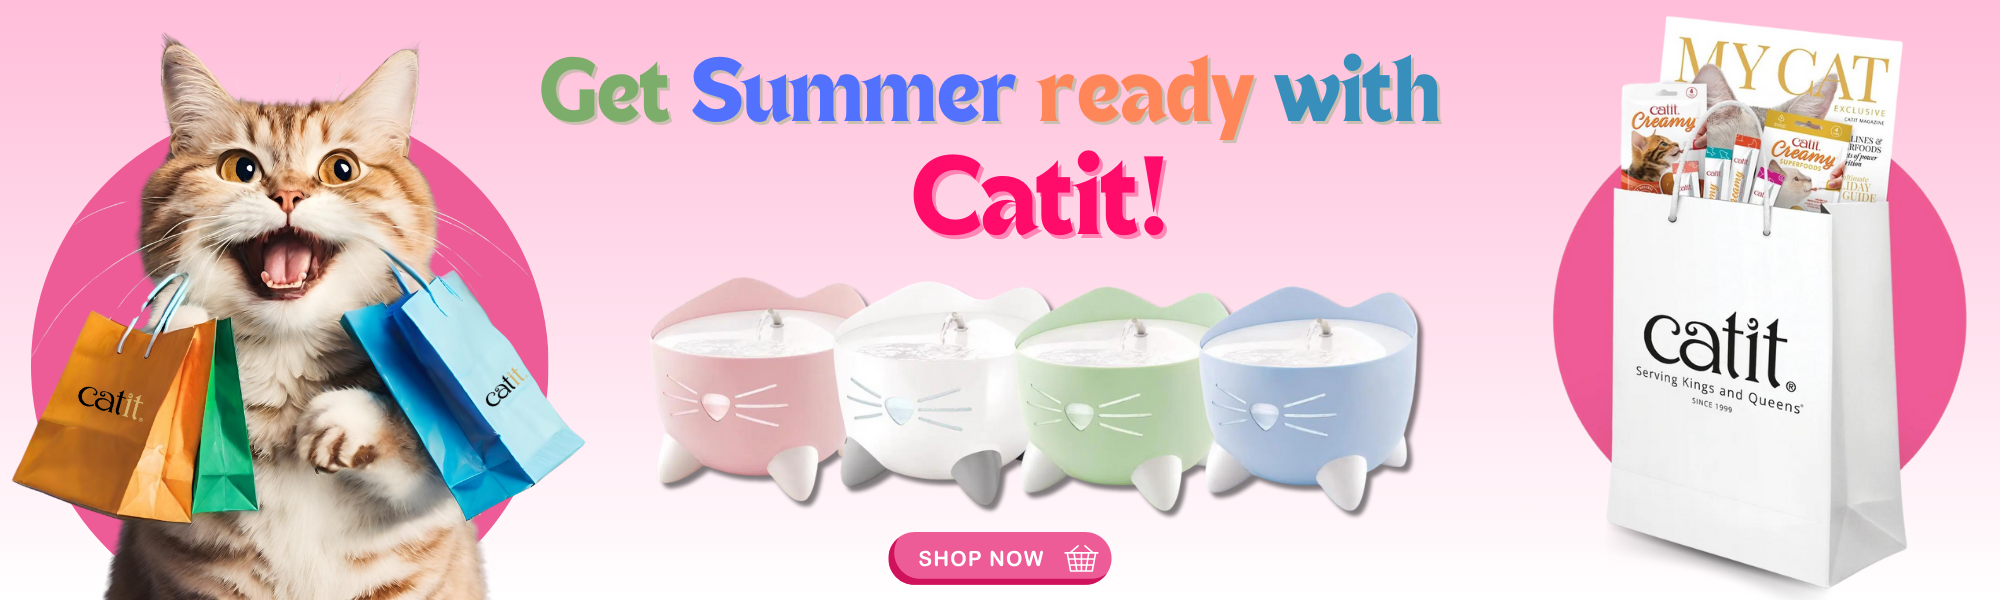 Get Summer ready with catit